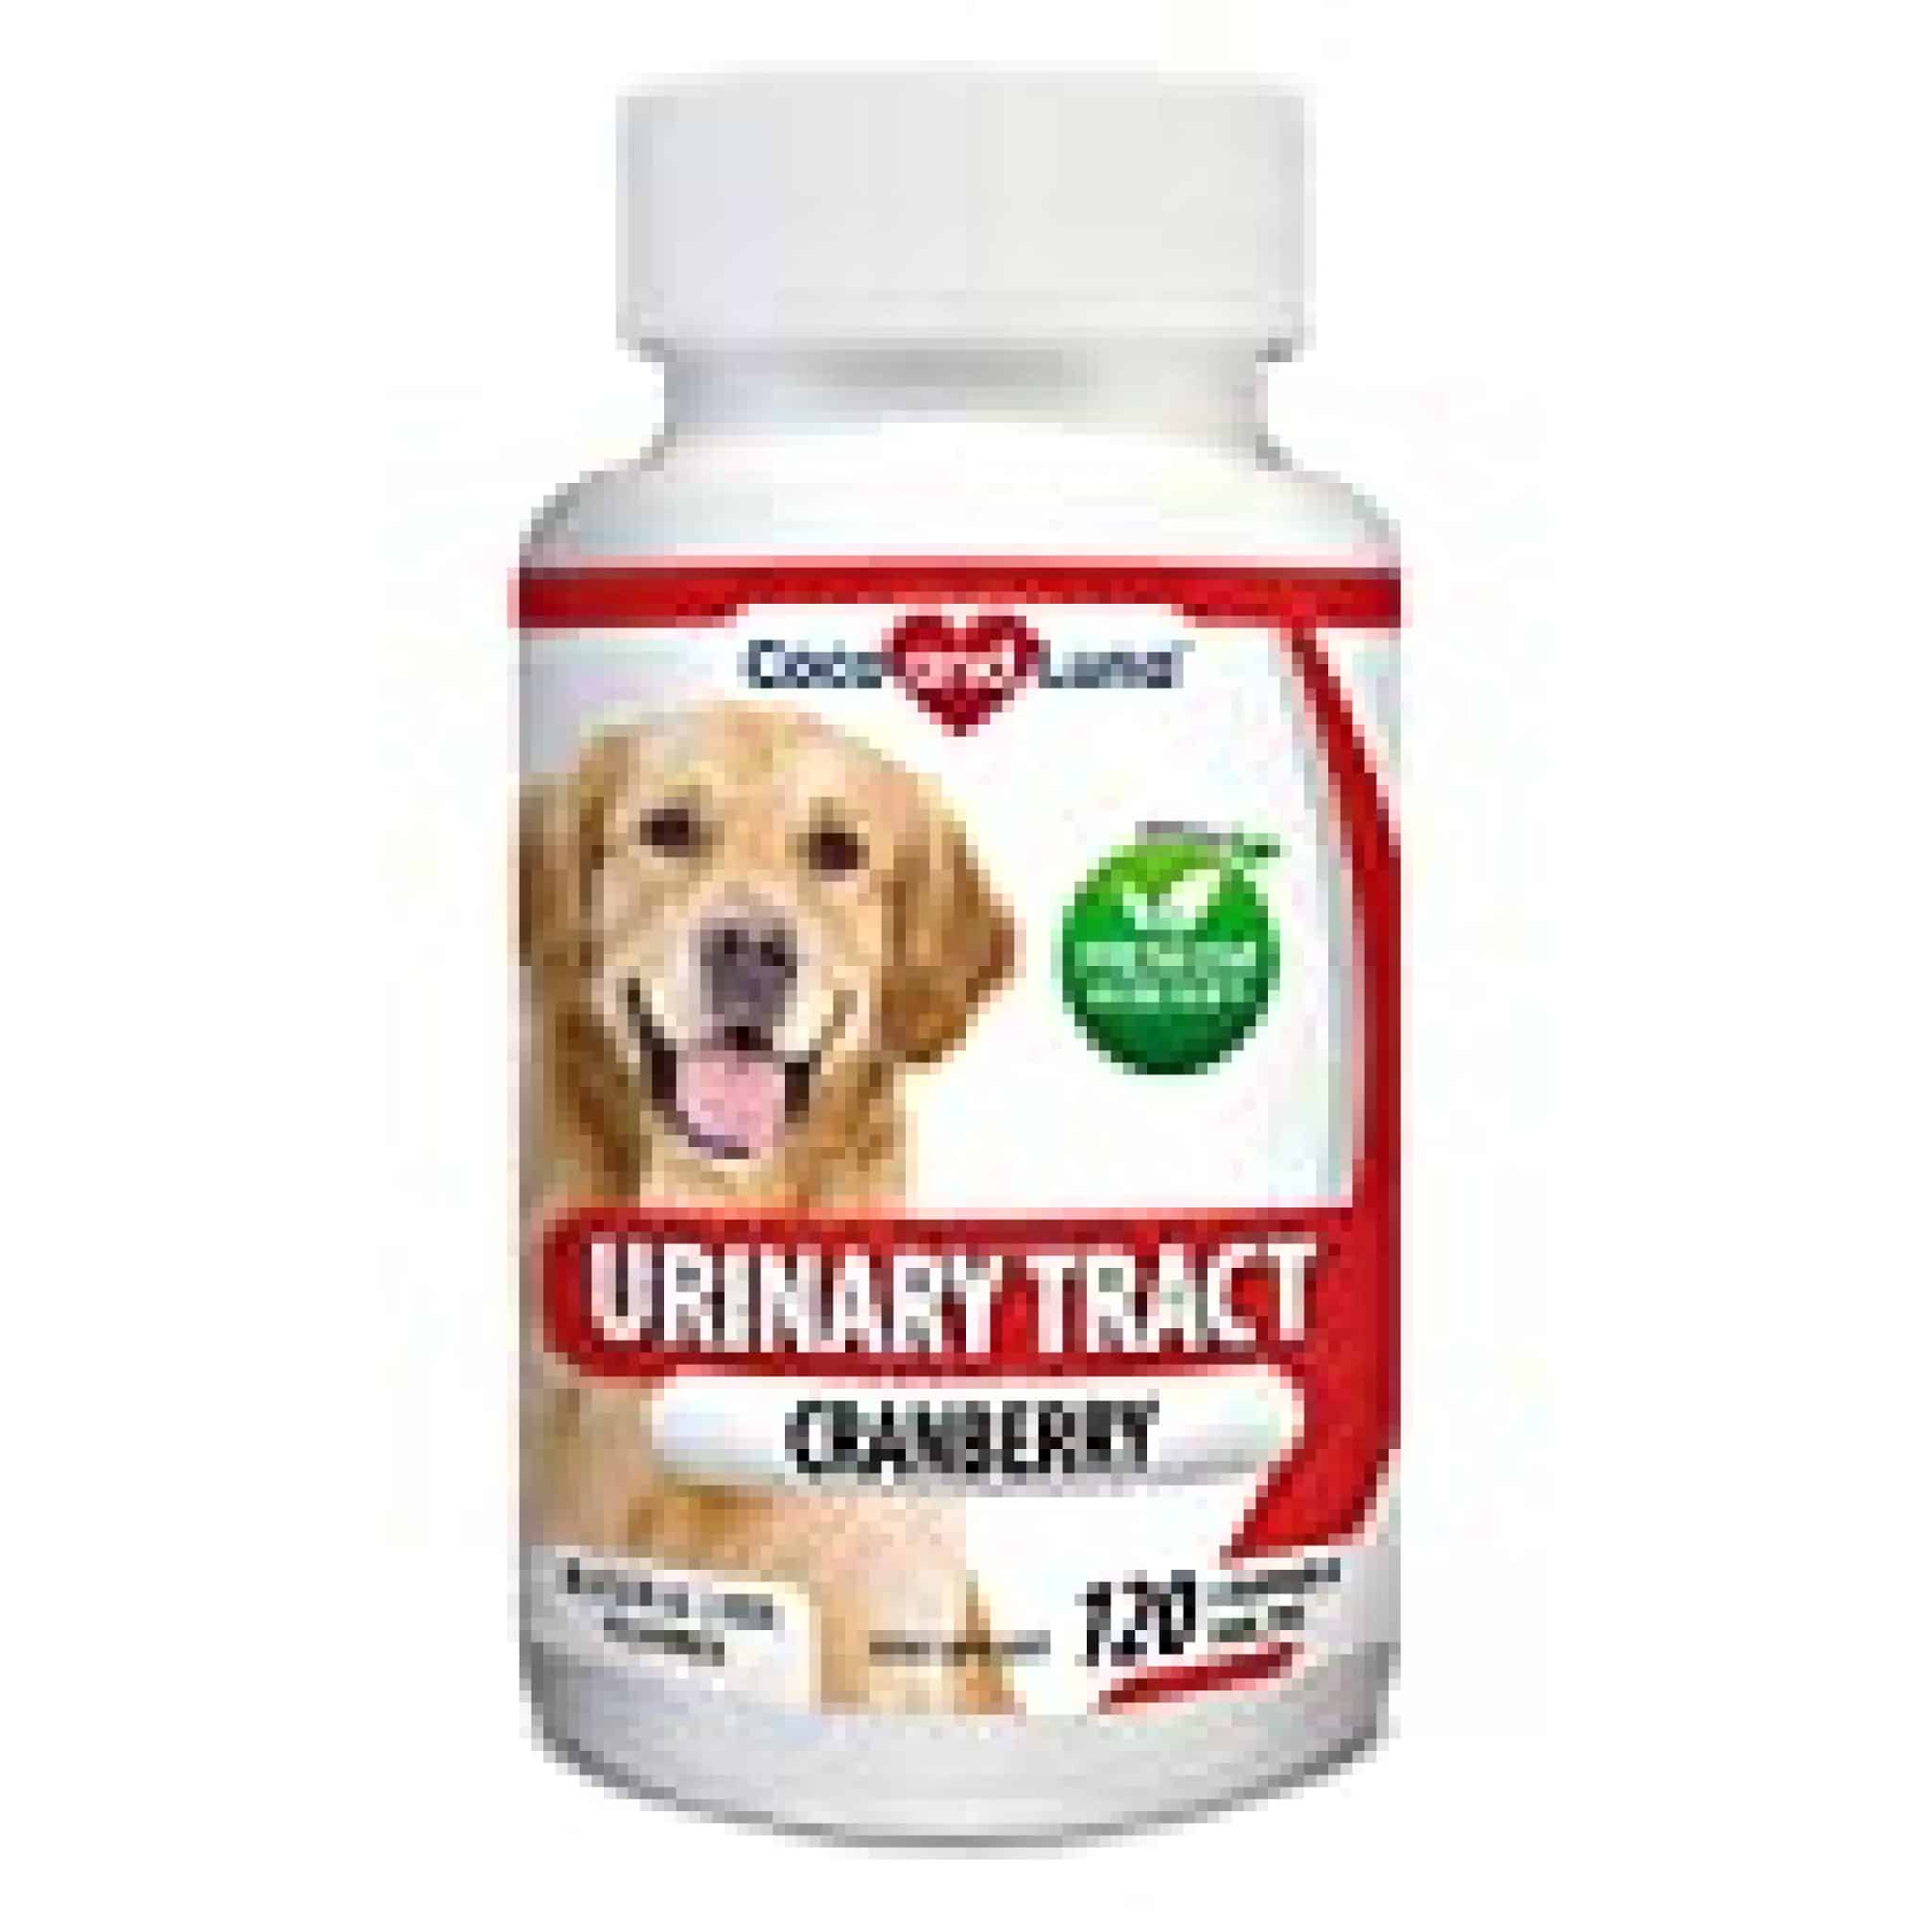 Cranberry for Dogs